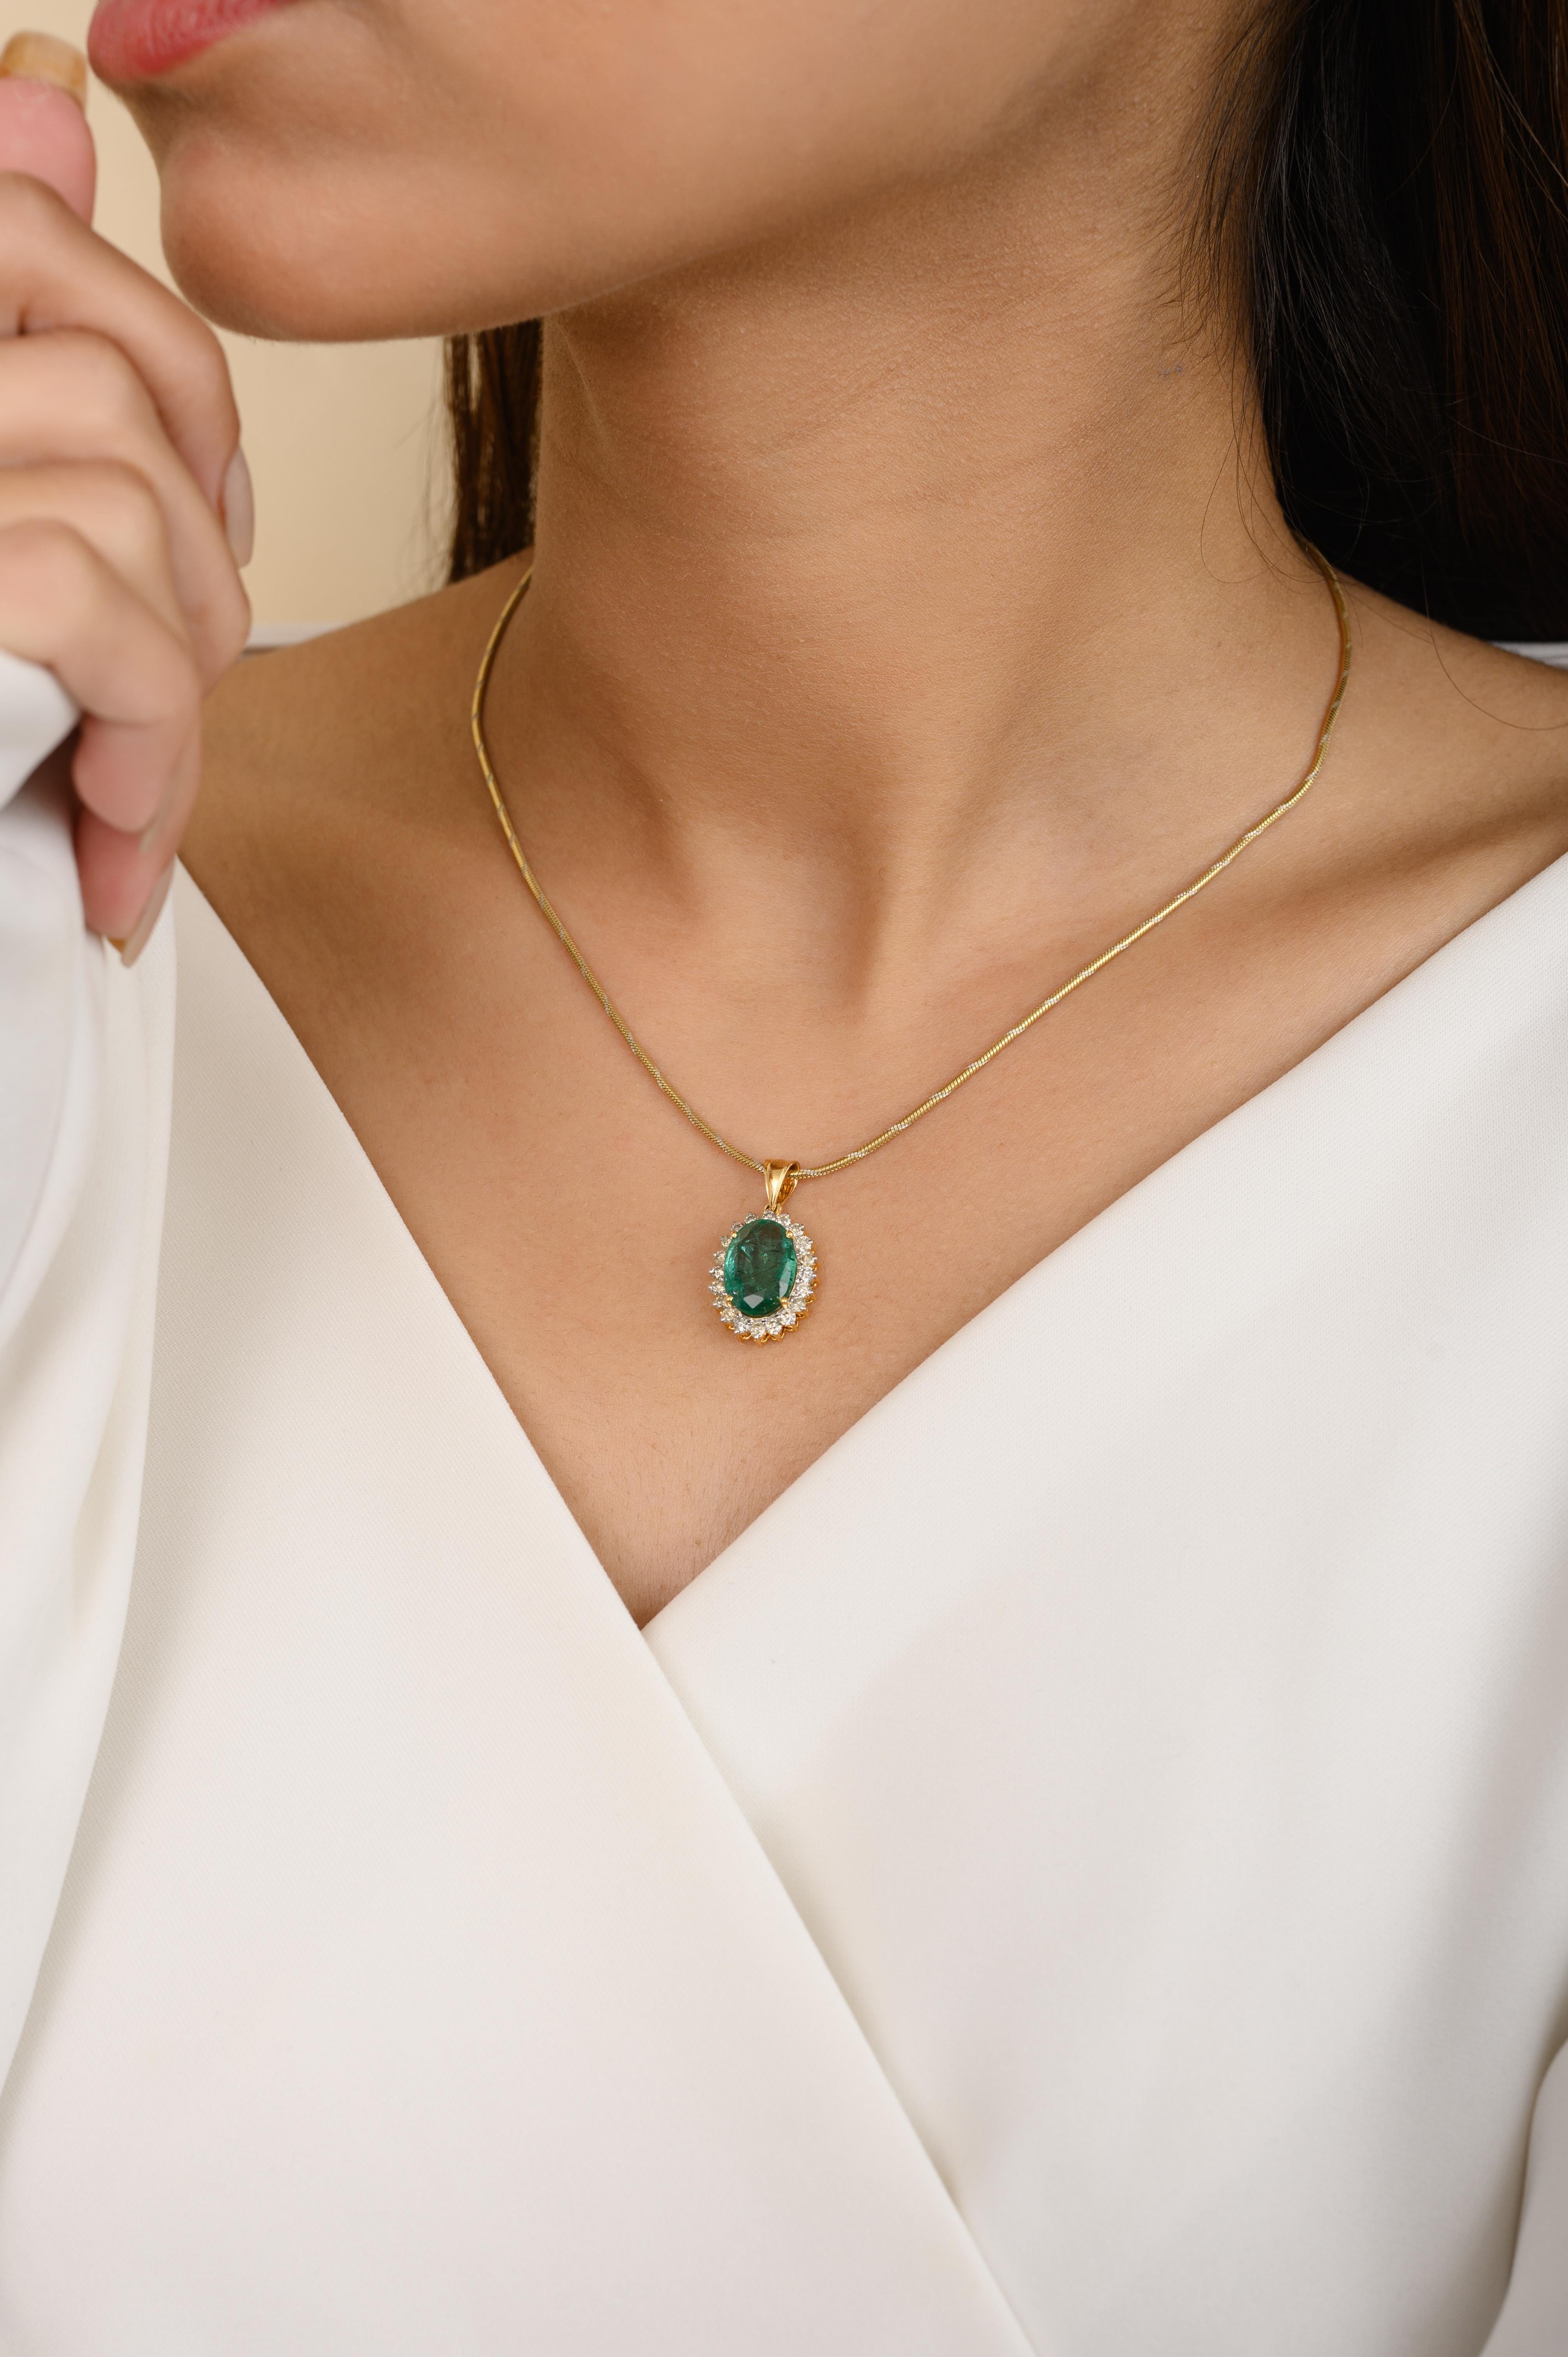 4.2 Carat Big Emerald Diamond Halo Pendant in 14K Gold studded with oval cut emerald and halo of diamonds. This stunning piece of jewelry instantly elevates a casual look or dressy outfit. 
Emerald enhances the intellectual capacity of the